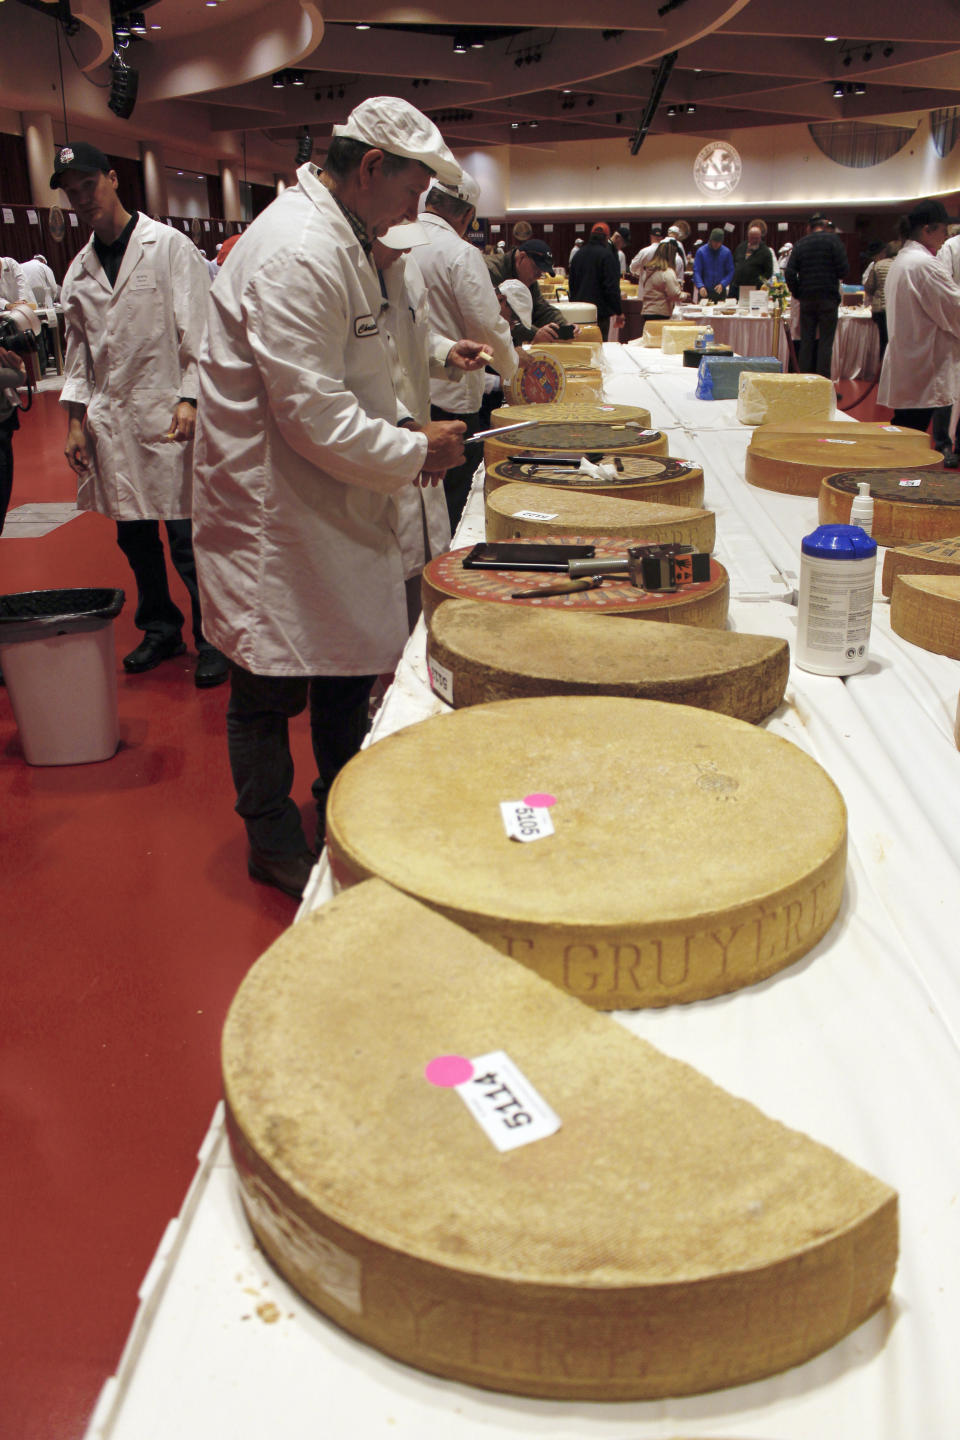 Judge Christophe Megevand inspects a wheel of Gruyere cheese at the biennial World Championship Cheese Contest, Tuesday, March 3, 2020, at the Monona Terrace Convention Center in Madison, Wis. It's the largest technical cheese, butter and yogurt competition in the world. This year the competition had a record 3,667 entries from 26 nations. (AP Photo/Carrie Antlfinger)